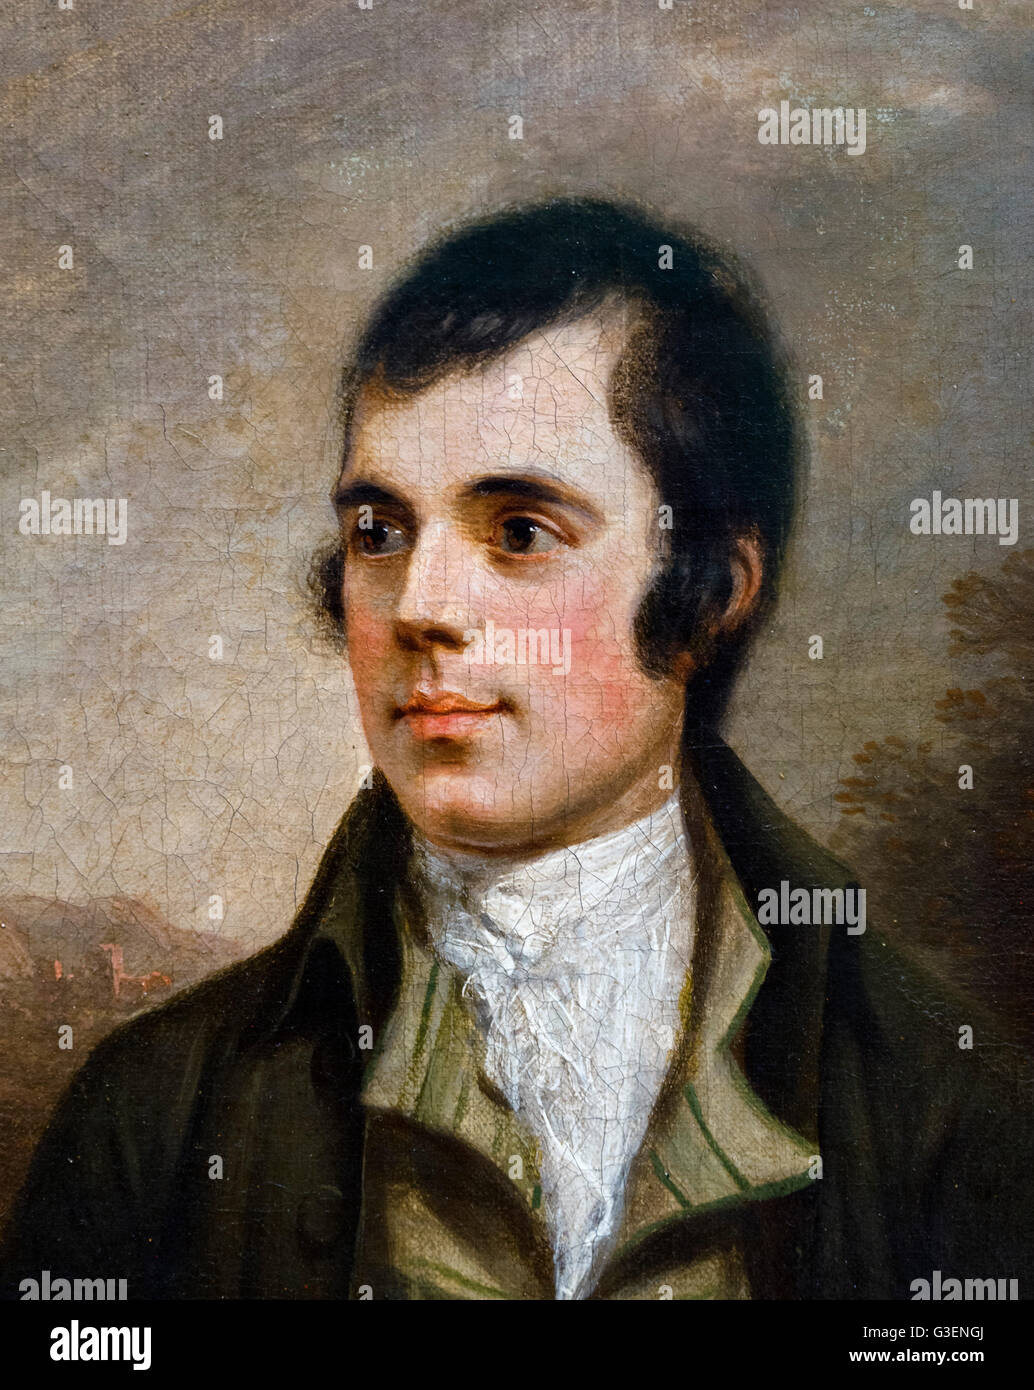 The 18thC Scottish poet, Robert Burns (1759-1796), also known as Rabbie Burns, was a Scottish poet and lyricist, widely regarded as the national poet of Scotland. Portrait by Alexander Nasmyth, oil on canvas, 1787. This image is a detail of a larger painting, G3ENGY. Stock Photo